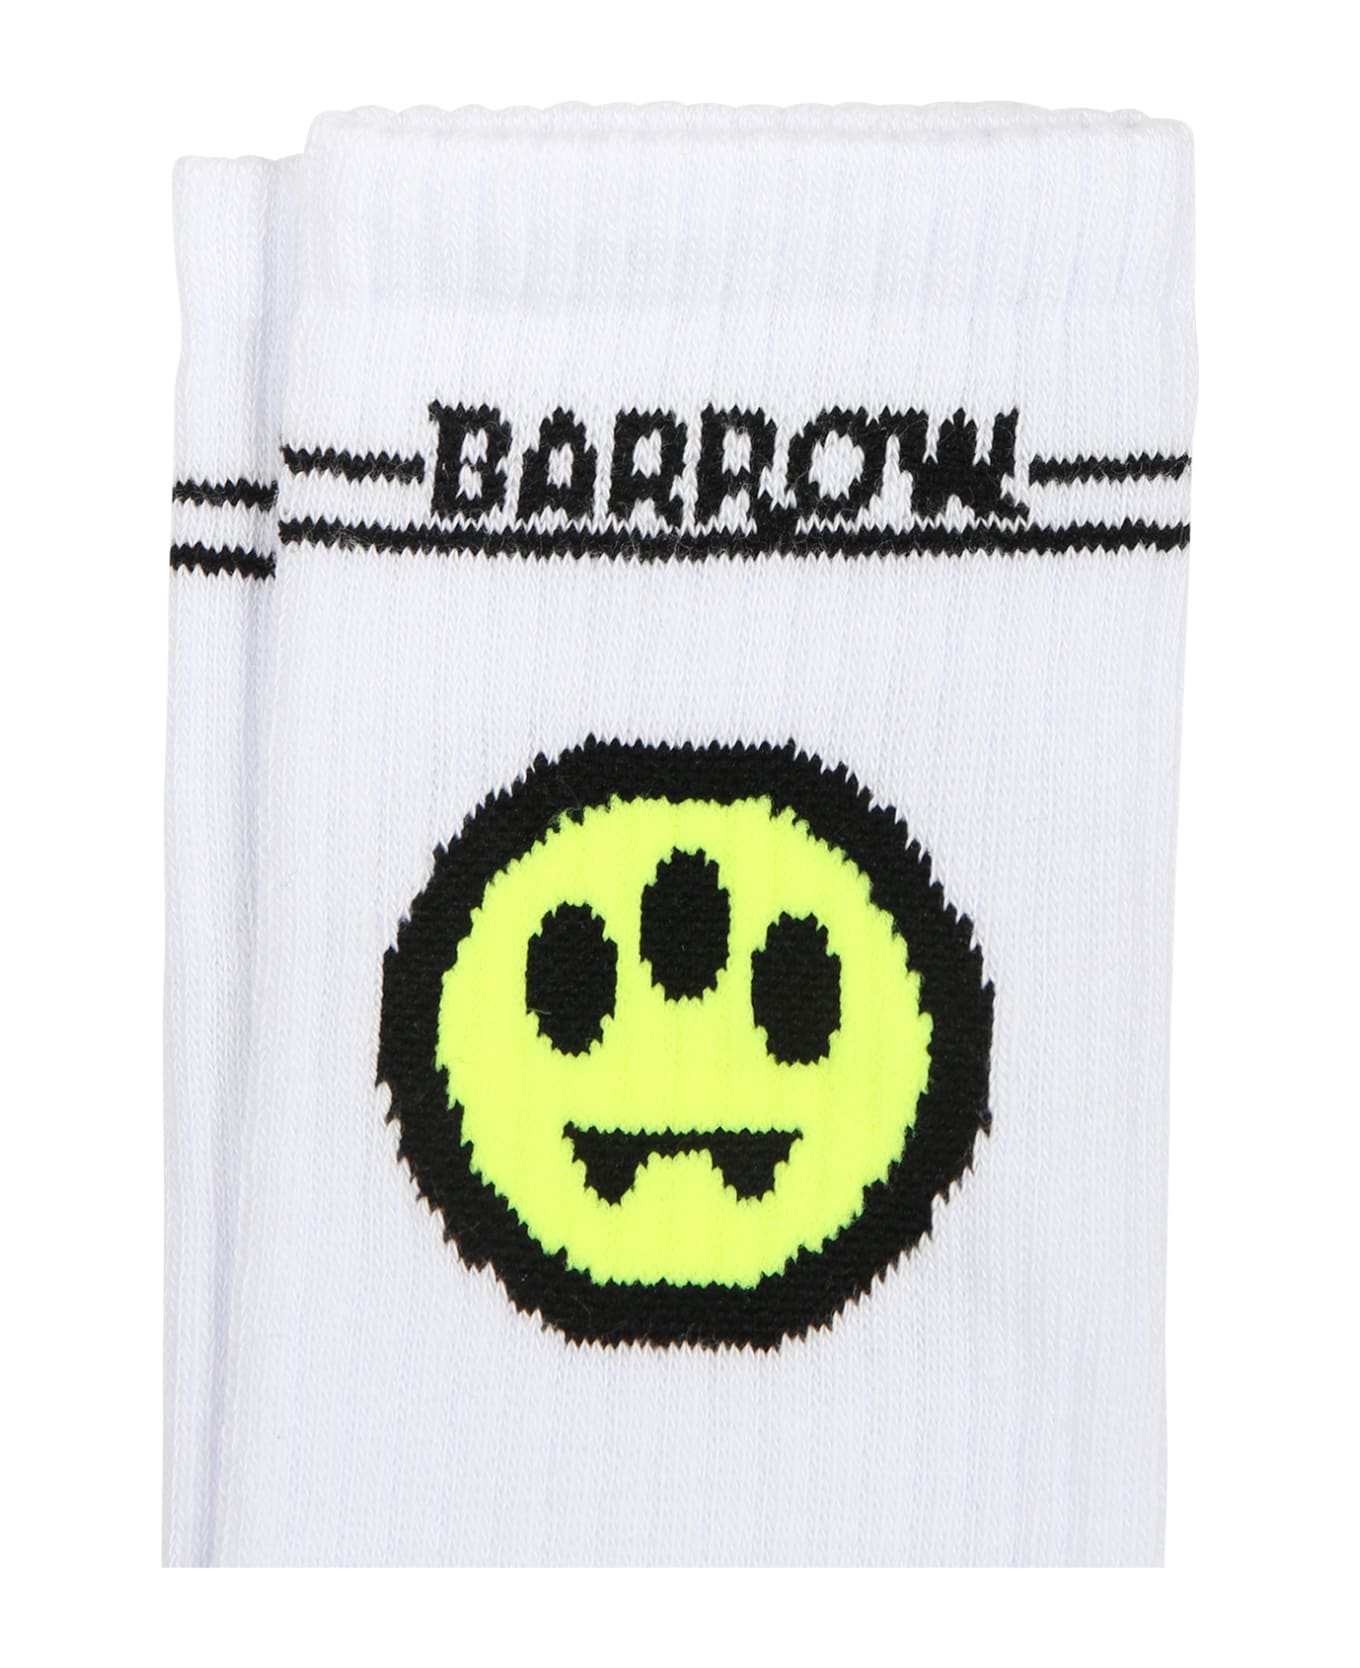 Barrow White Socks For Kids With Logo And Smiley - Bianco